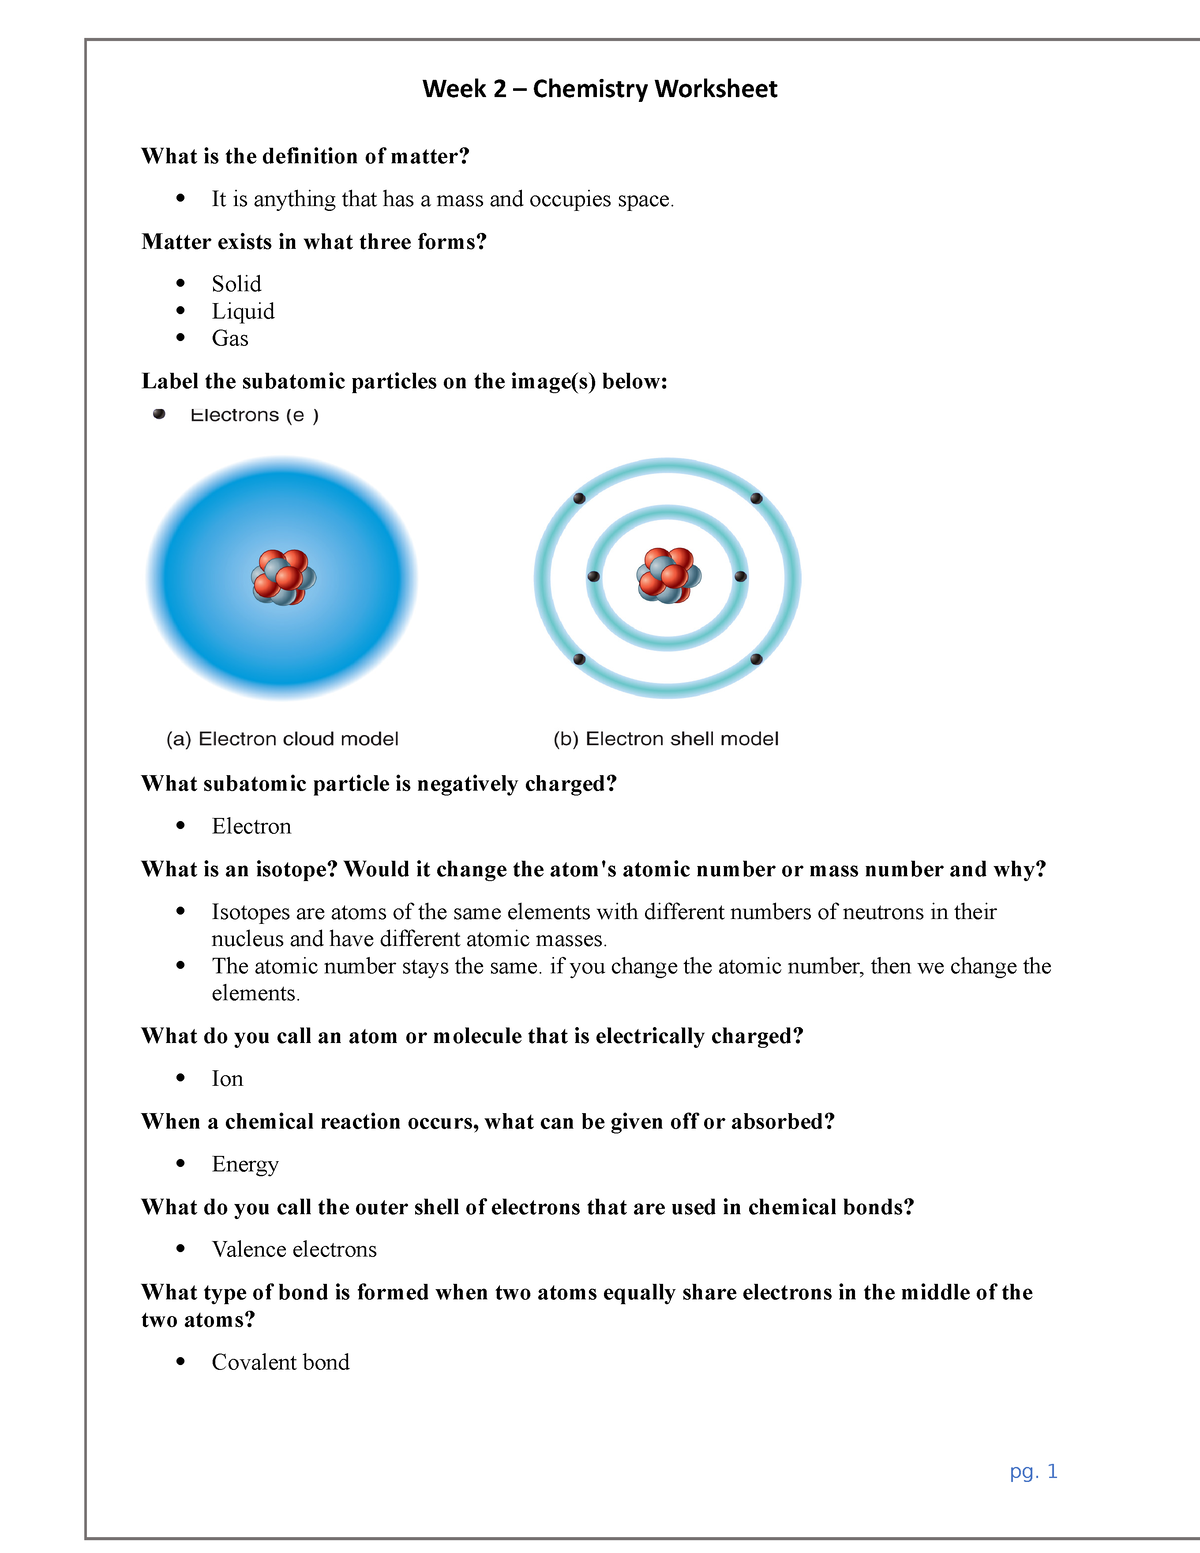 Week 2 Chemistry Worksheet - What is the definition of matter? It is ...